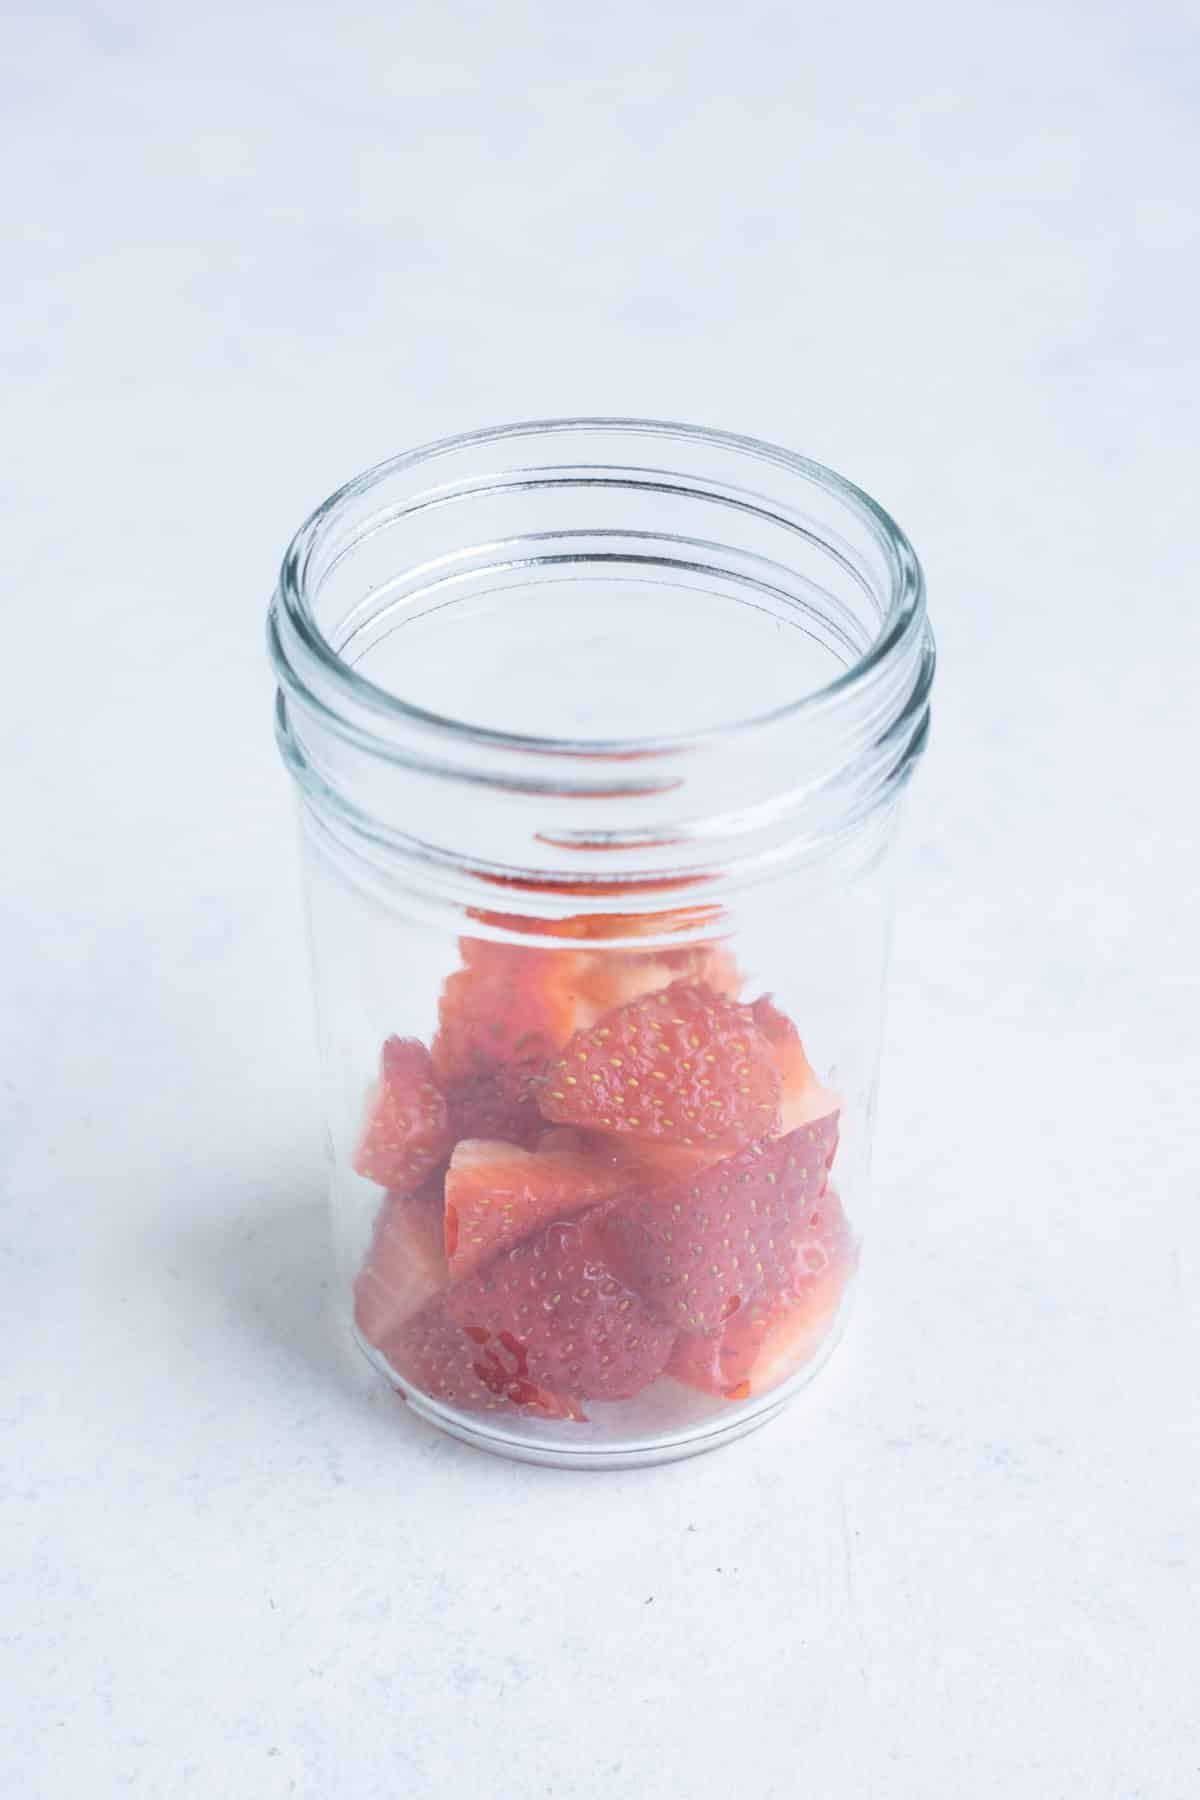 Strawberries are added to the jar.